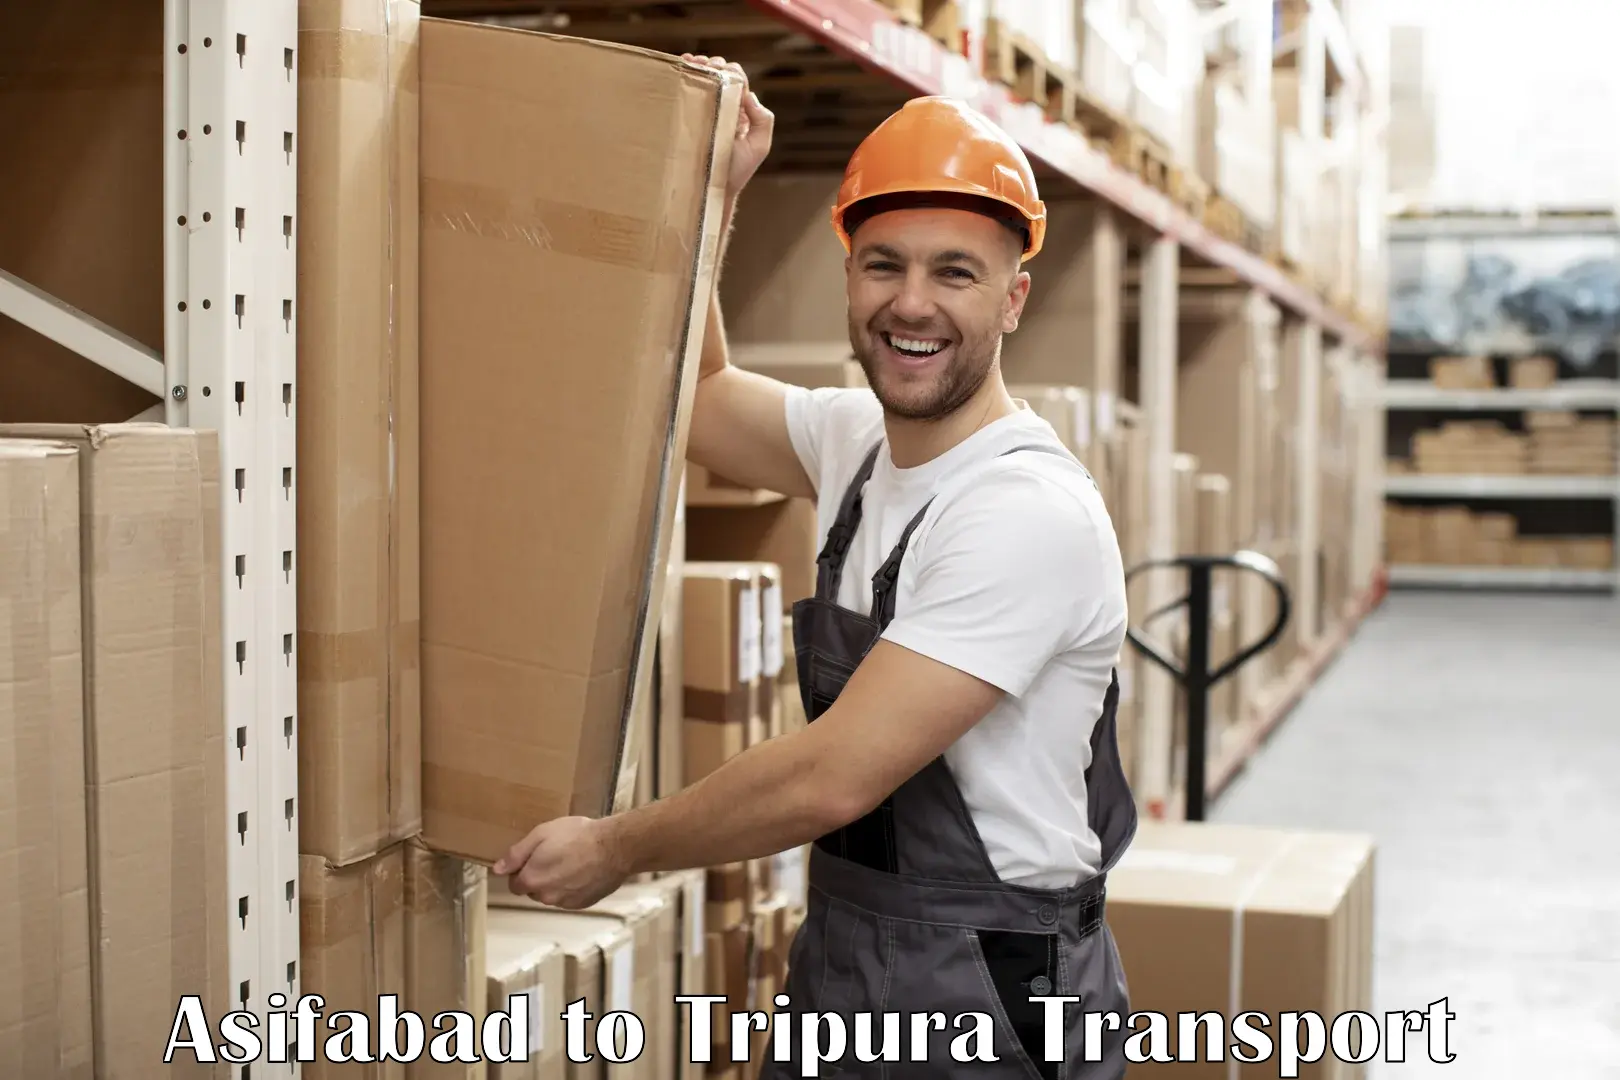 Delivery service Asifabad to Udaipur Tripura